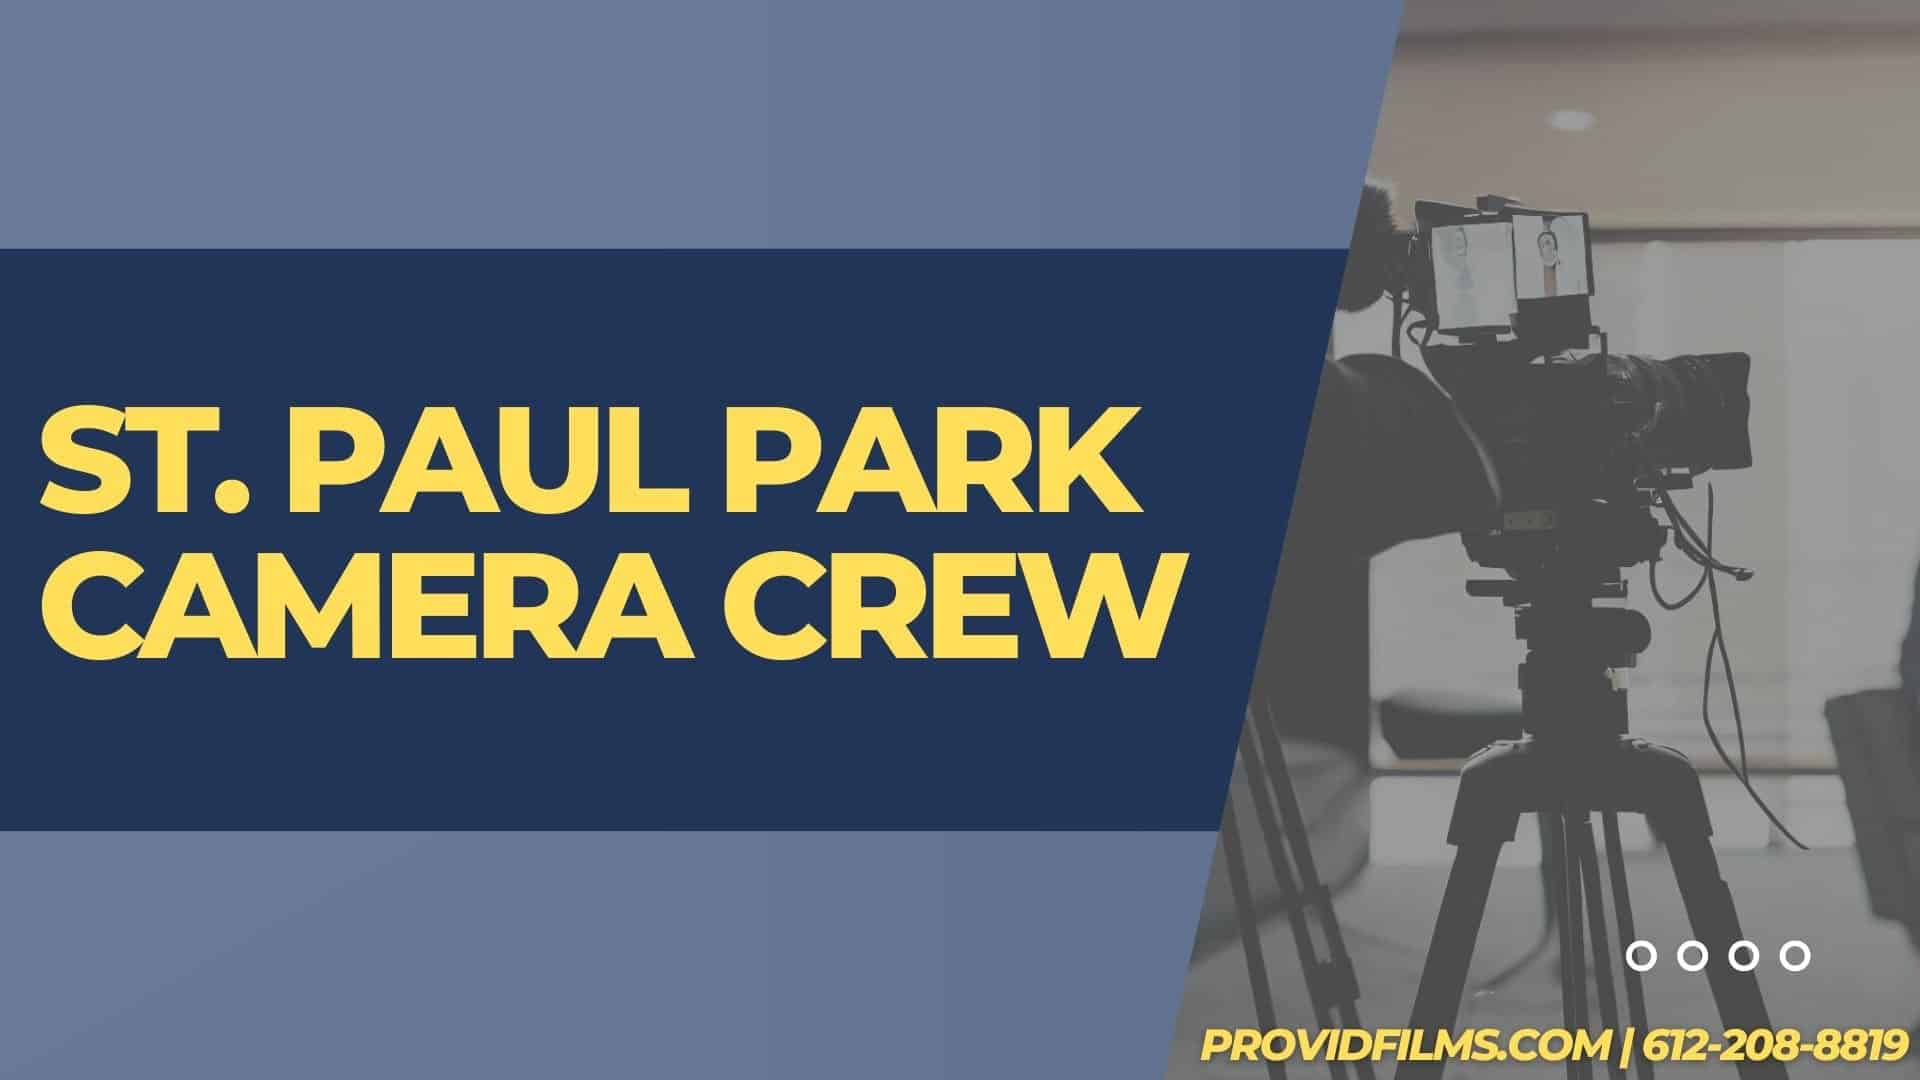 Graphic of a video camera with the text saying "St. Paul Park Camera Crew"